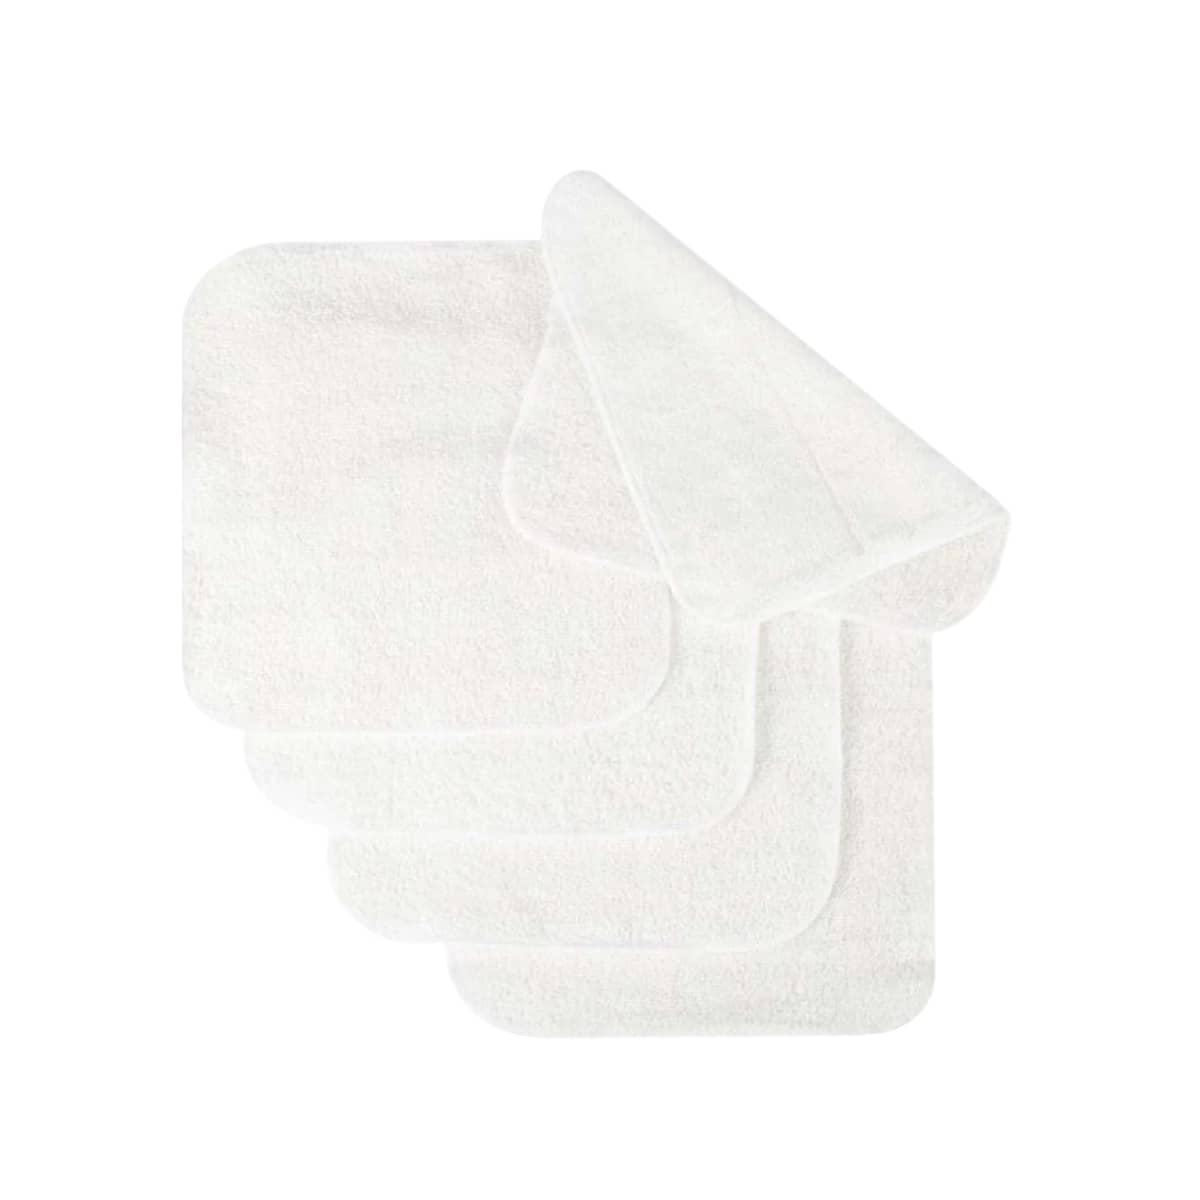 Bubblebubs Reusable Cloth Baby Wipes